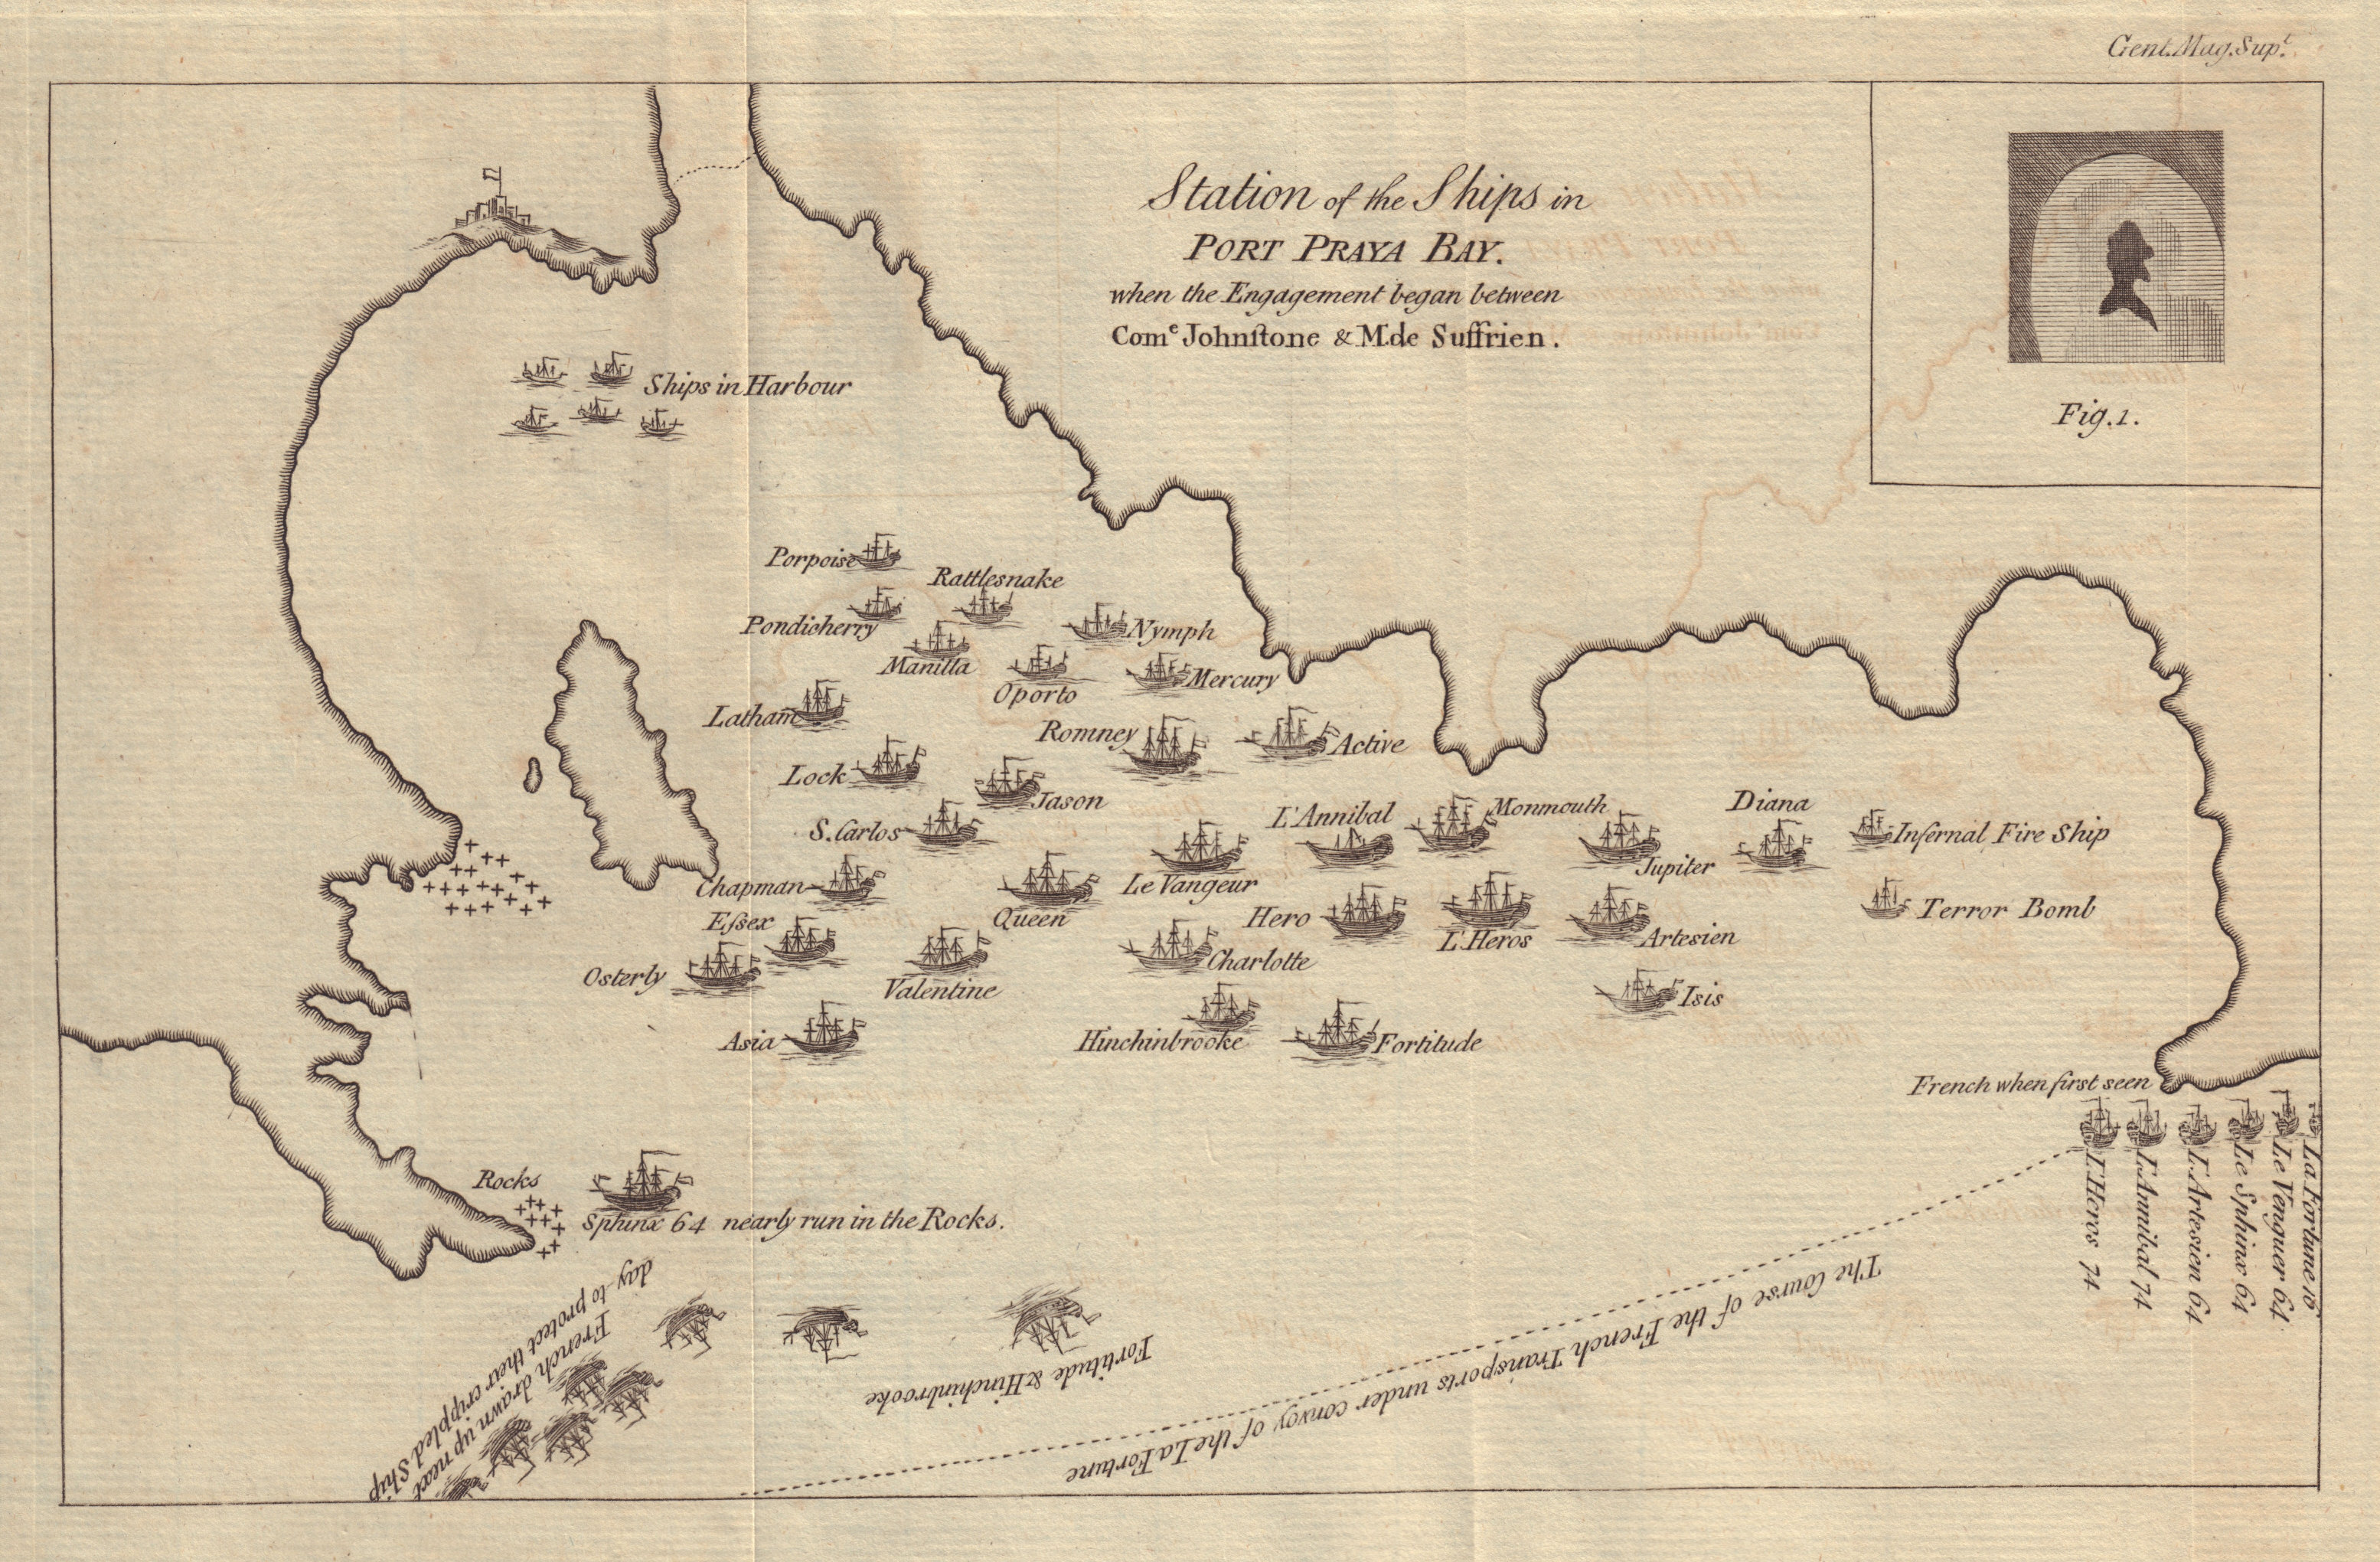 Associate Product Station of the Ships in Port Praya Bay… Praia, Cape Verde. GENTS MAG 1781 map